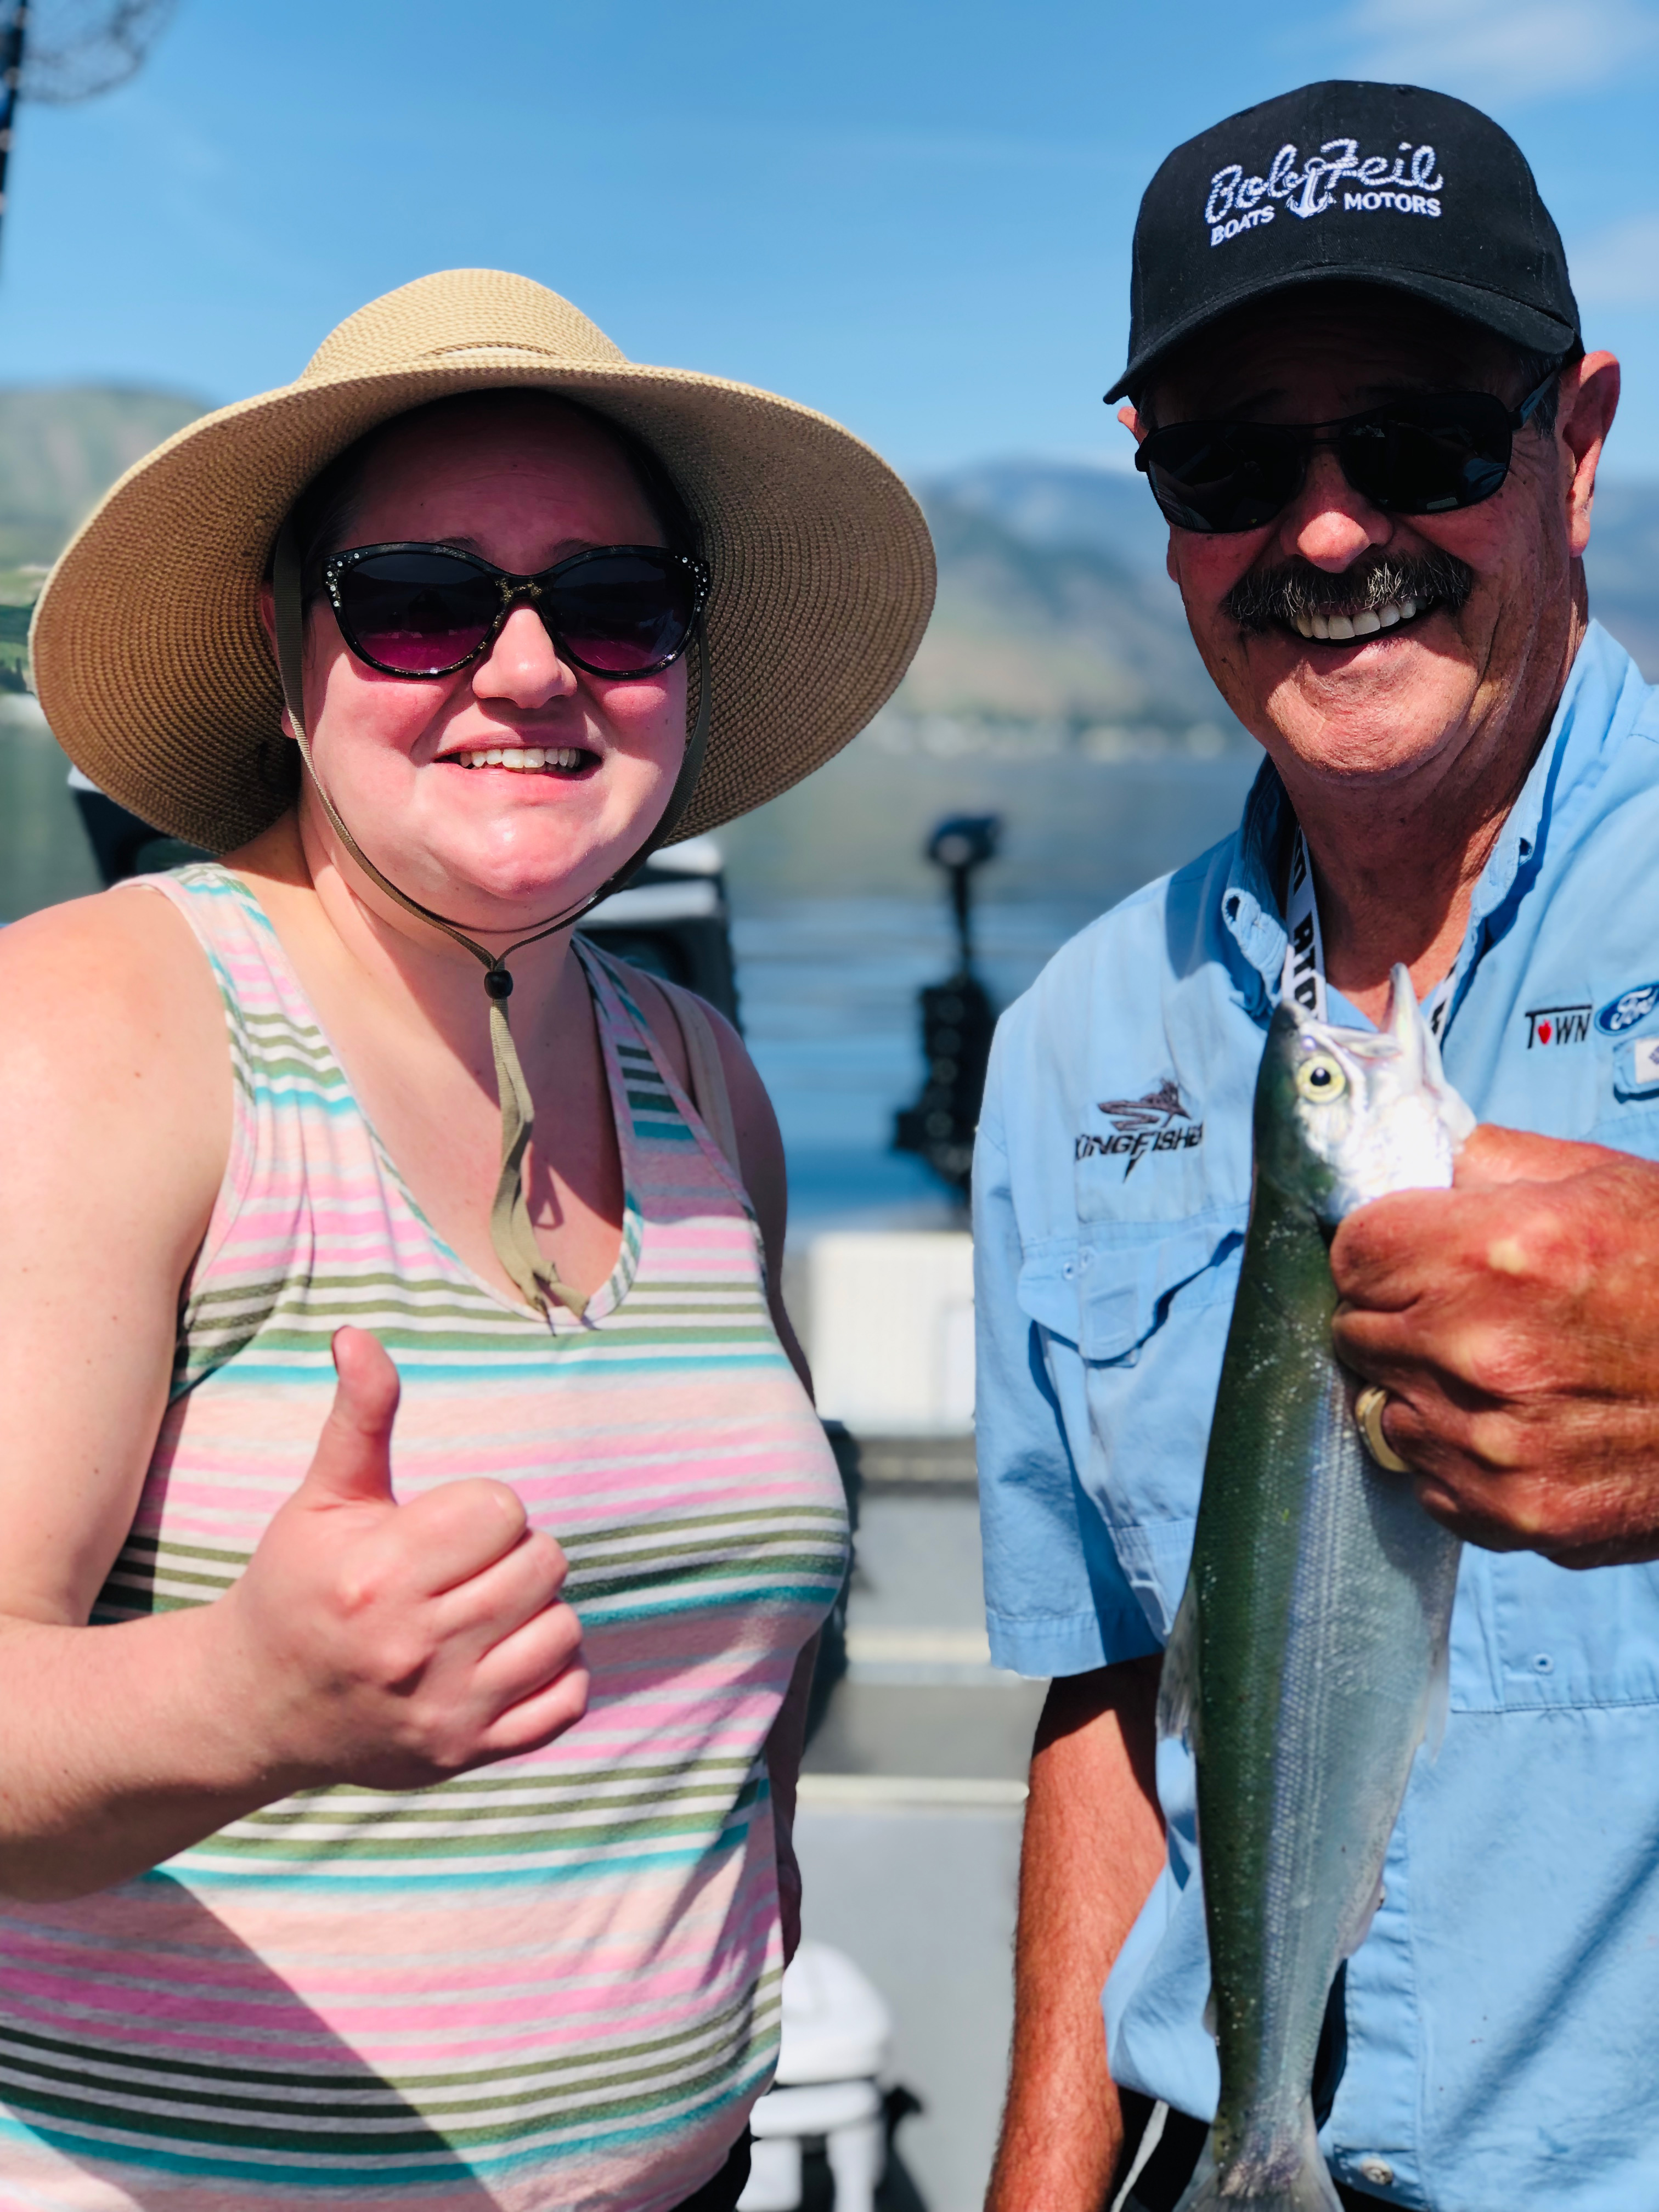 Dave Graybill and his daughter fishing for kokanee on Lake Chelan, smiling and enjoying the day on the boat.